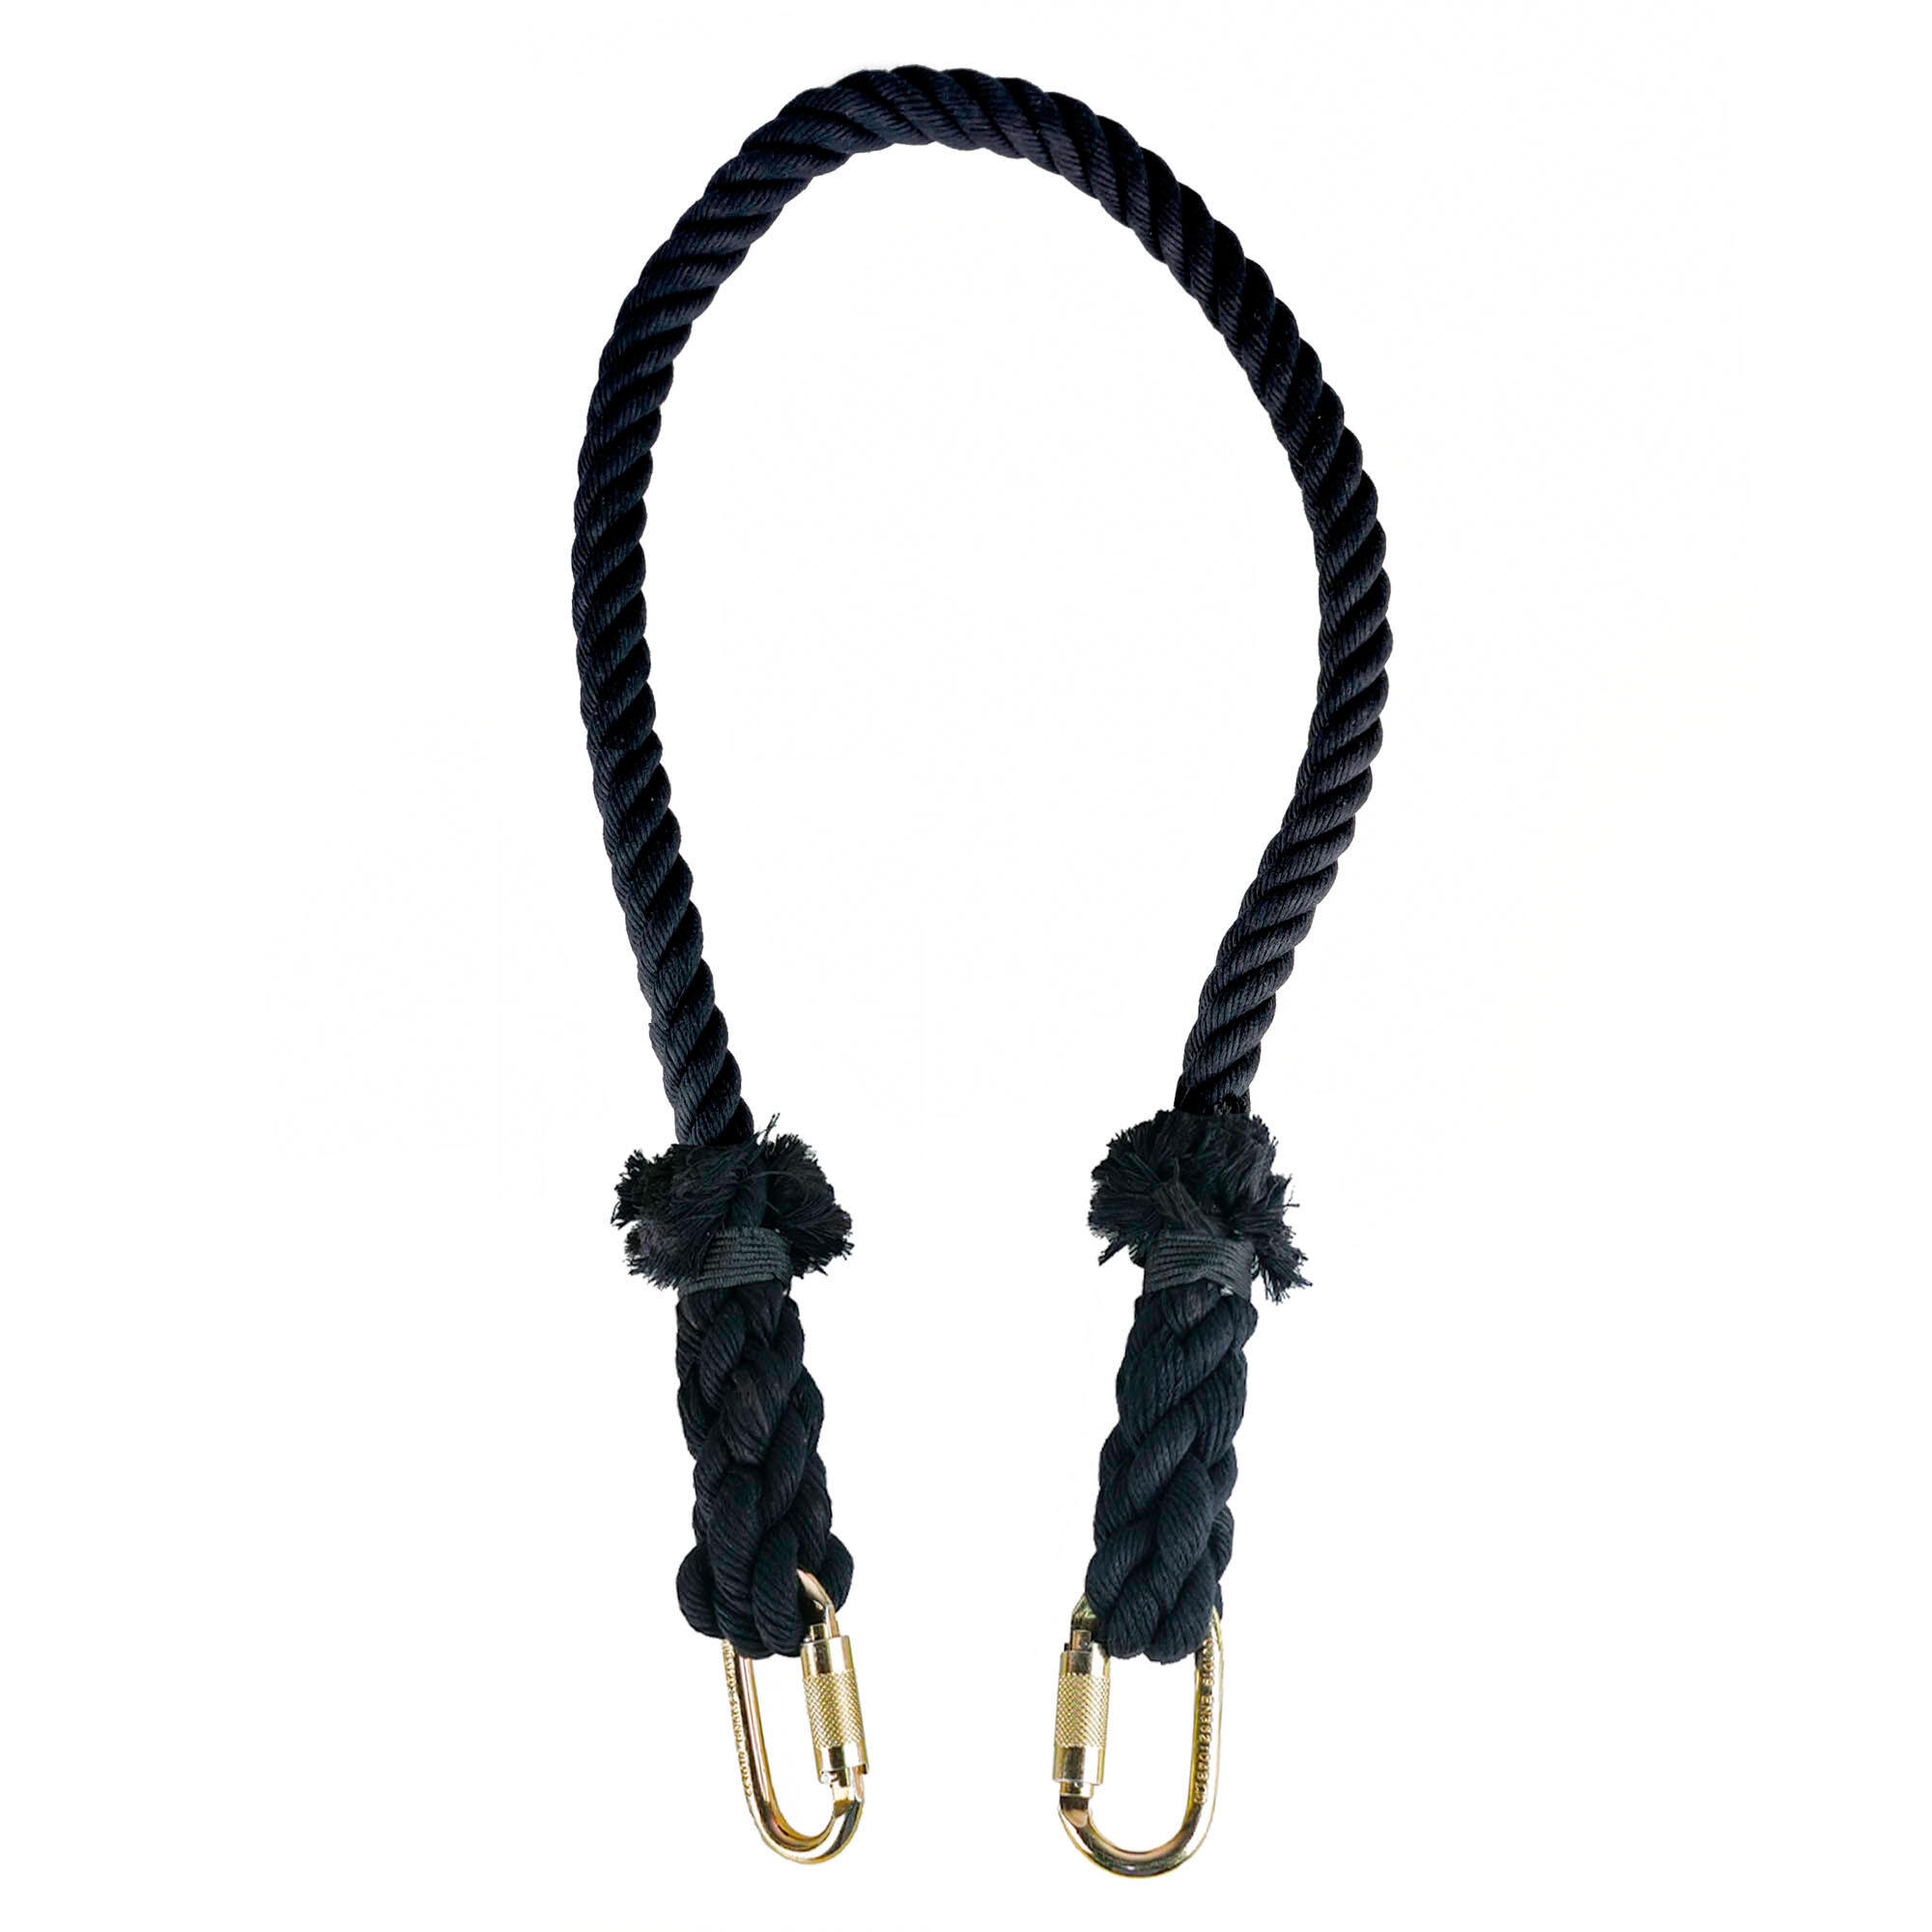 PRODIGY Prodigy Dyna-Core Hanging rope for Aerial Hoop-Black